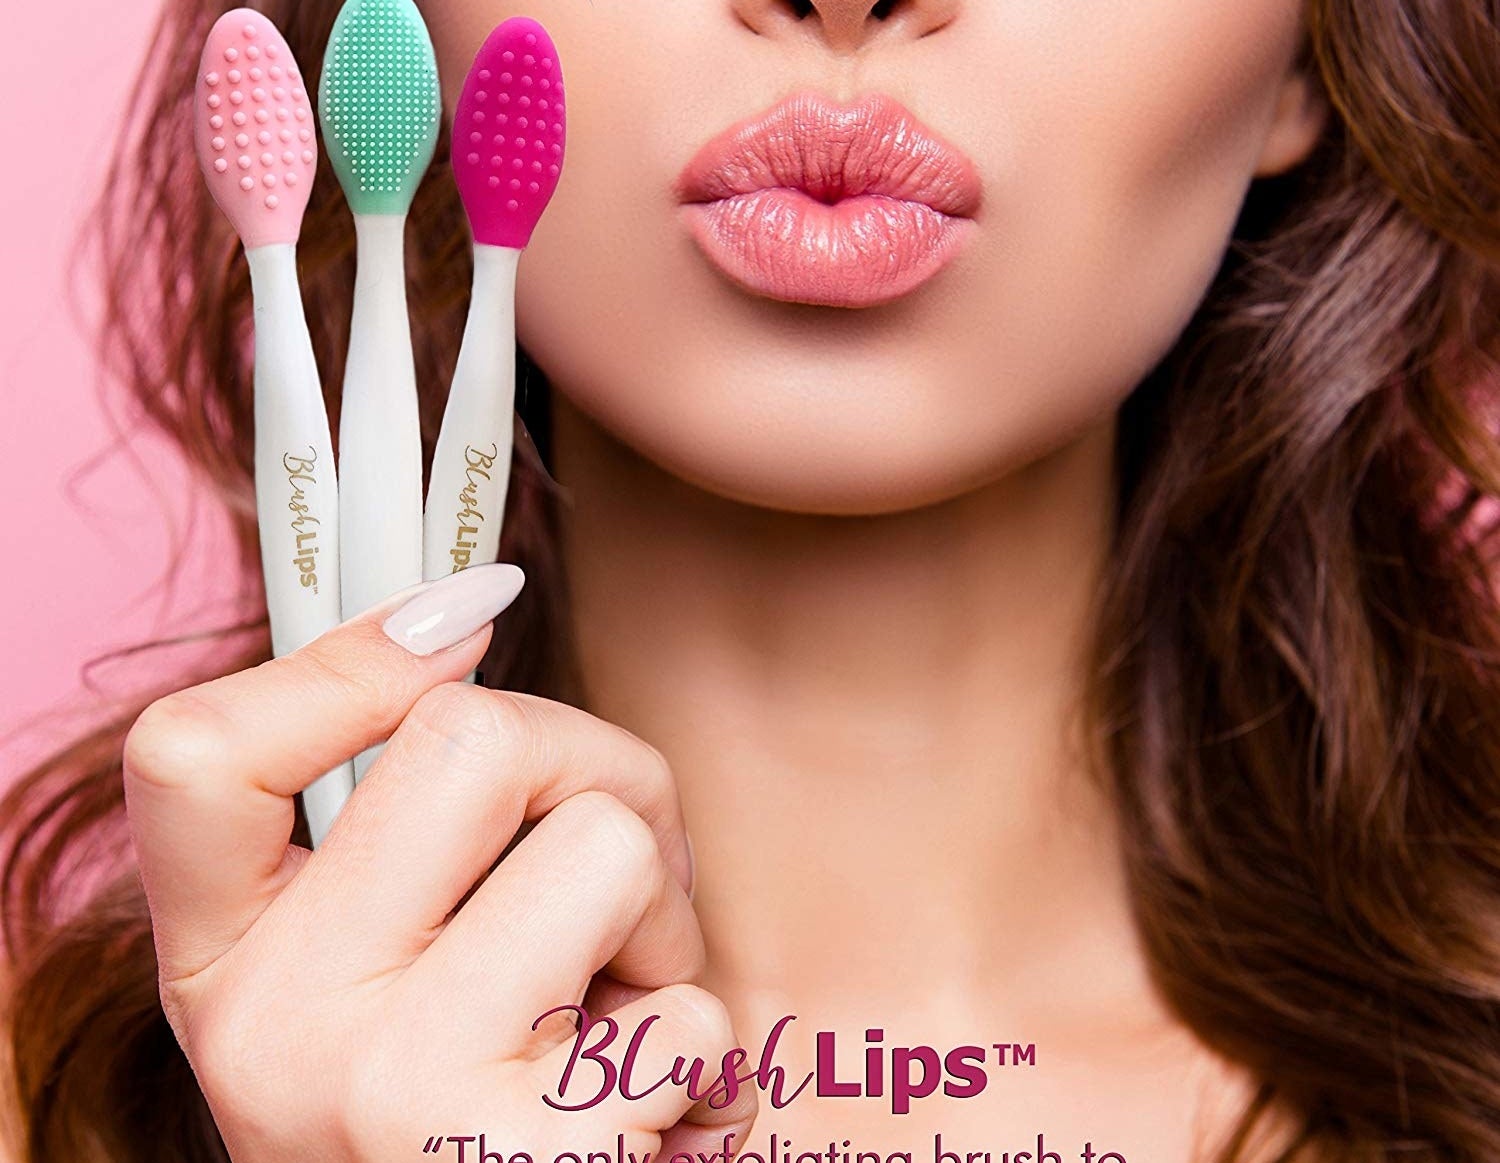 A model holding up three lip brushes